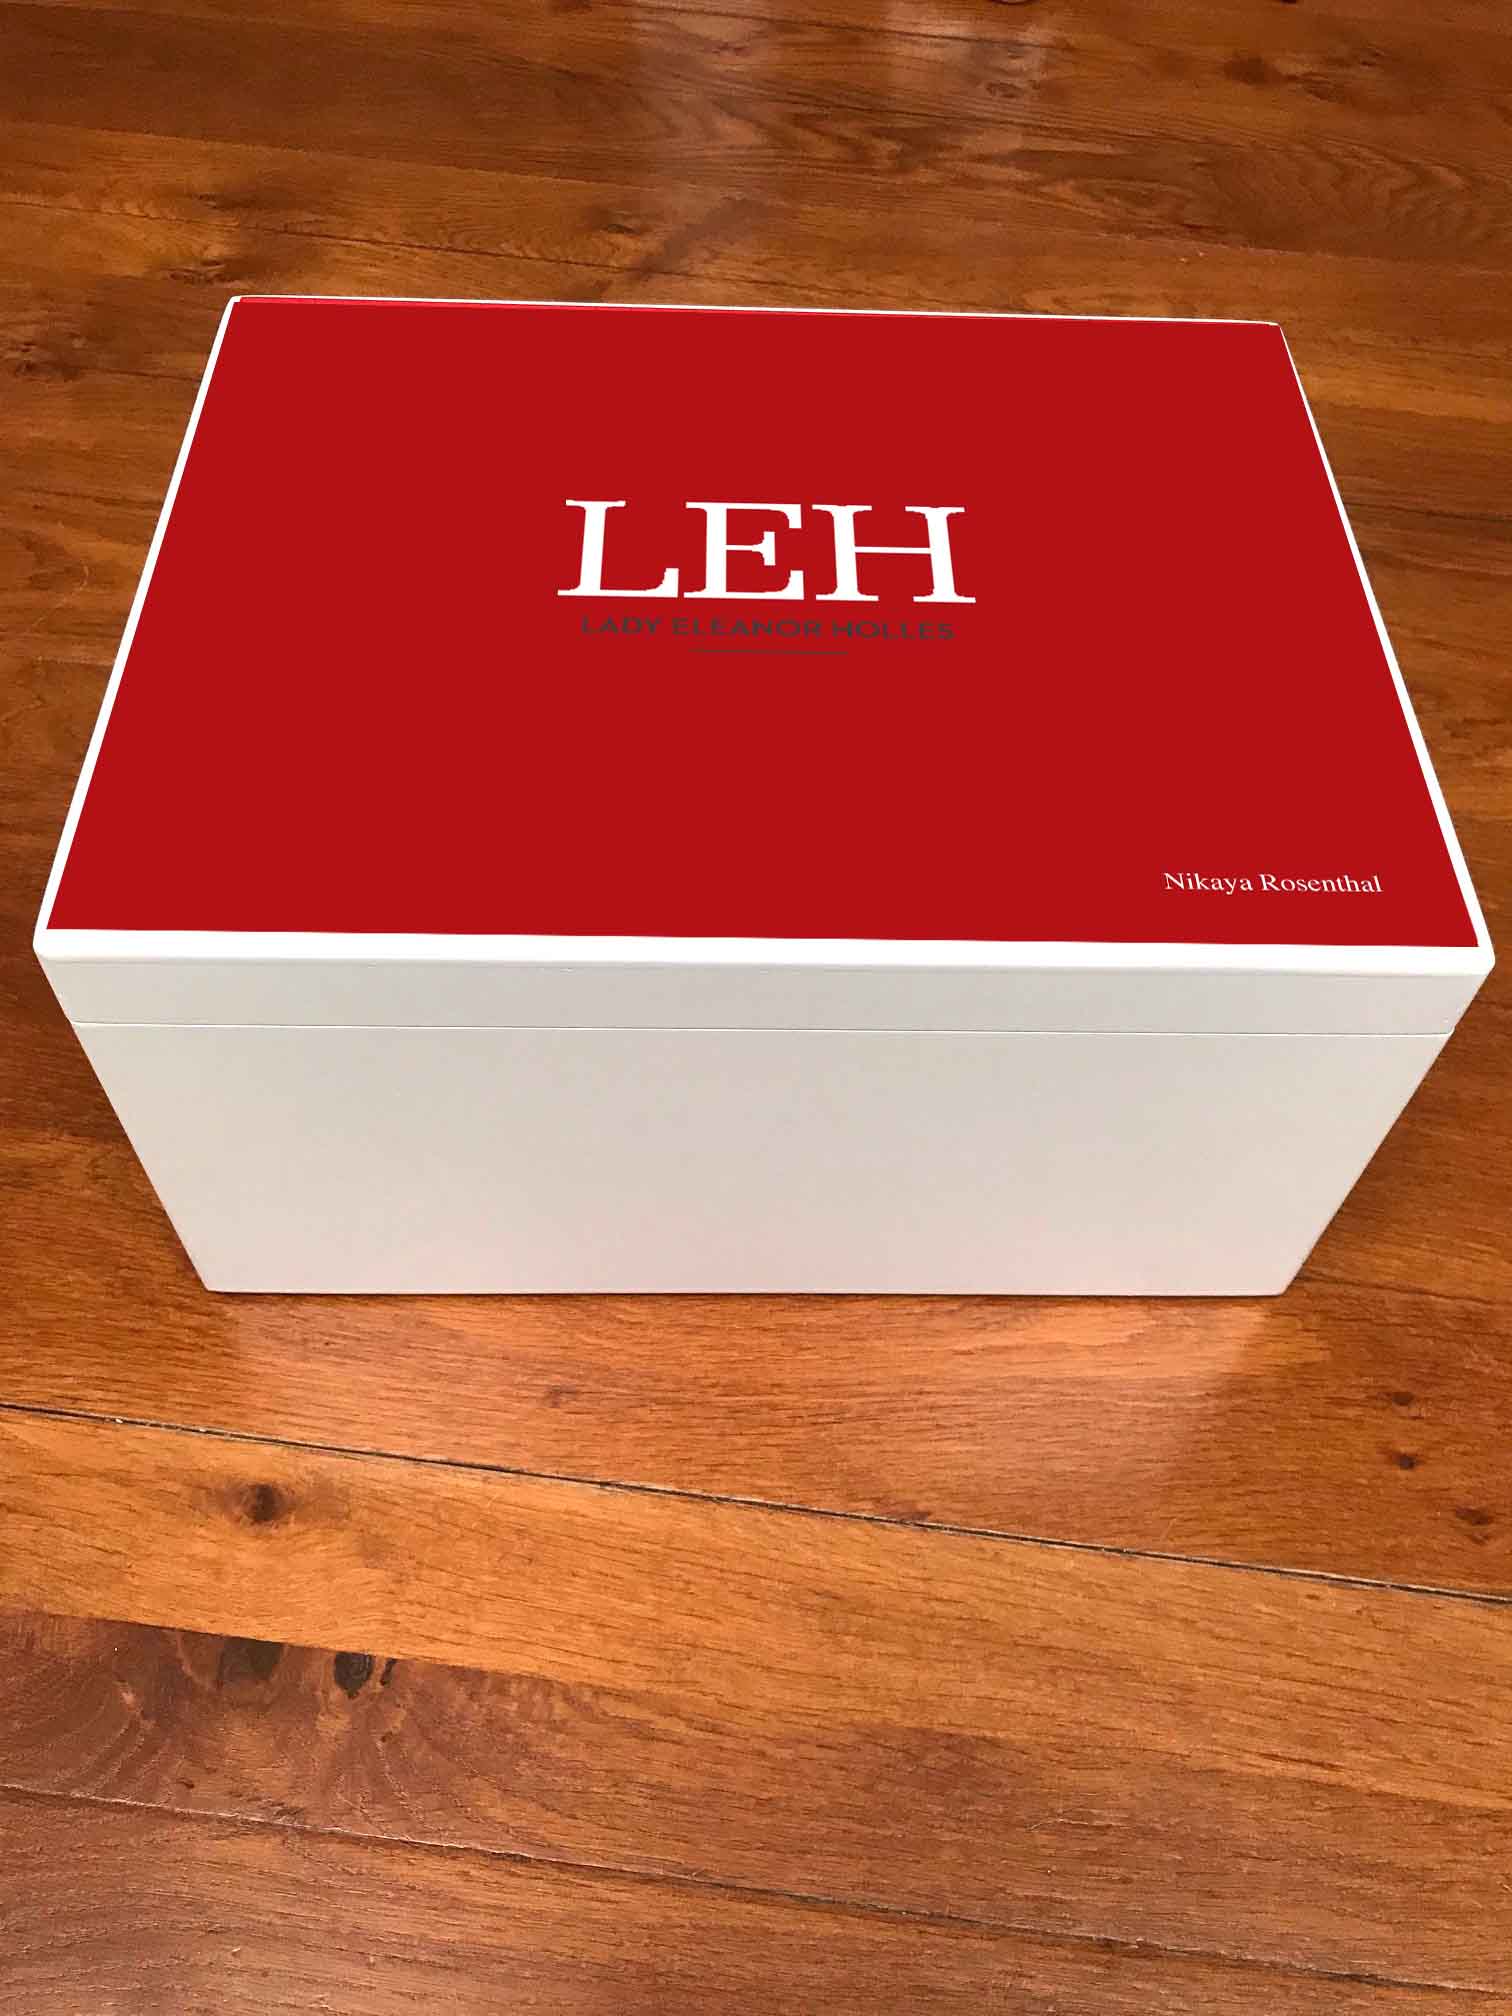 Lady Eleanor Holles (LEH) School Memory Wood Box -  - A4 Chest - Red top - Personalised